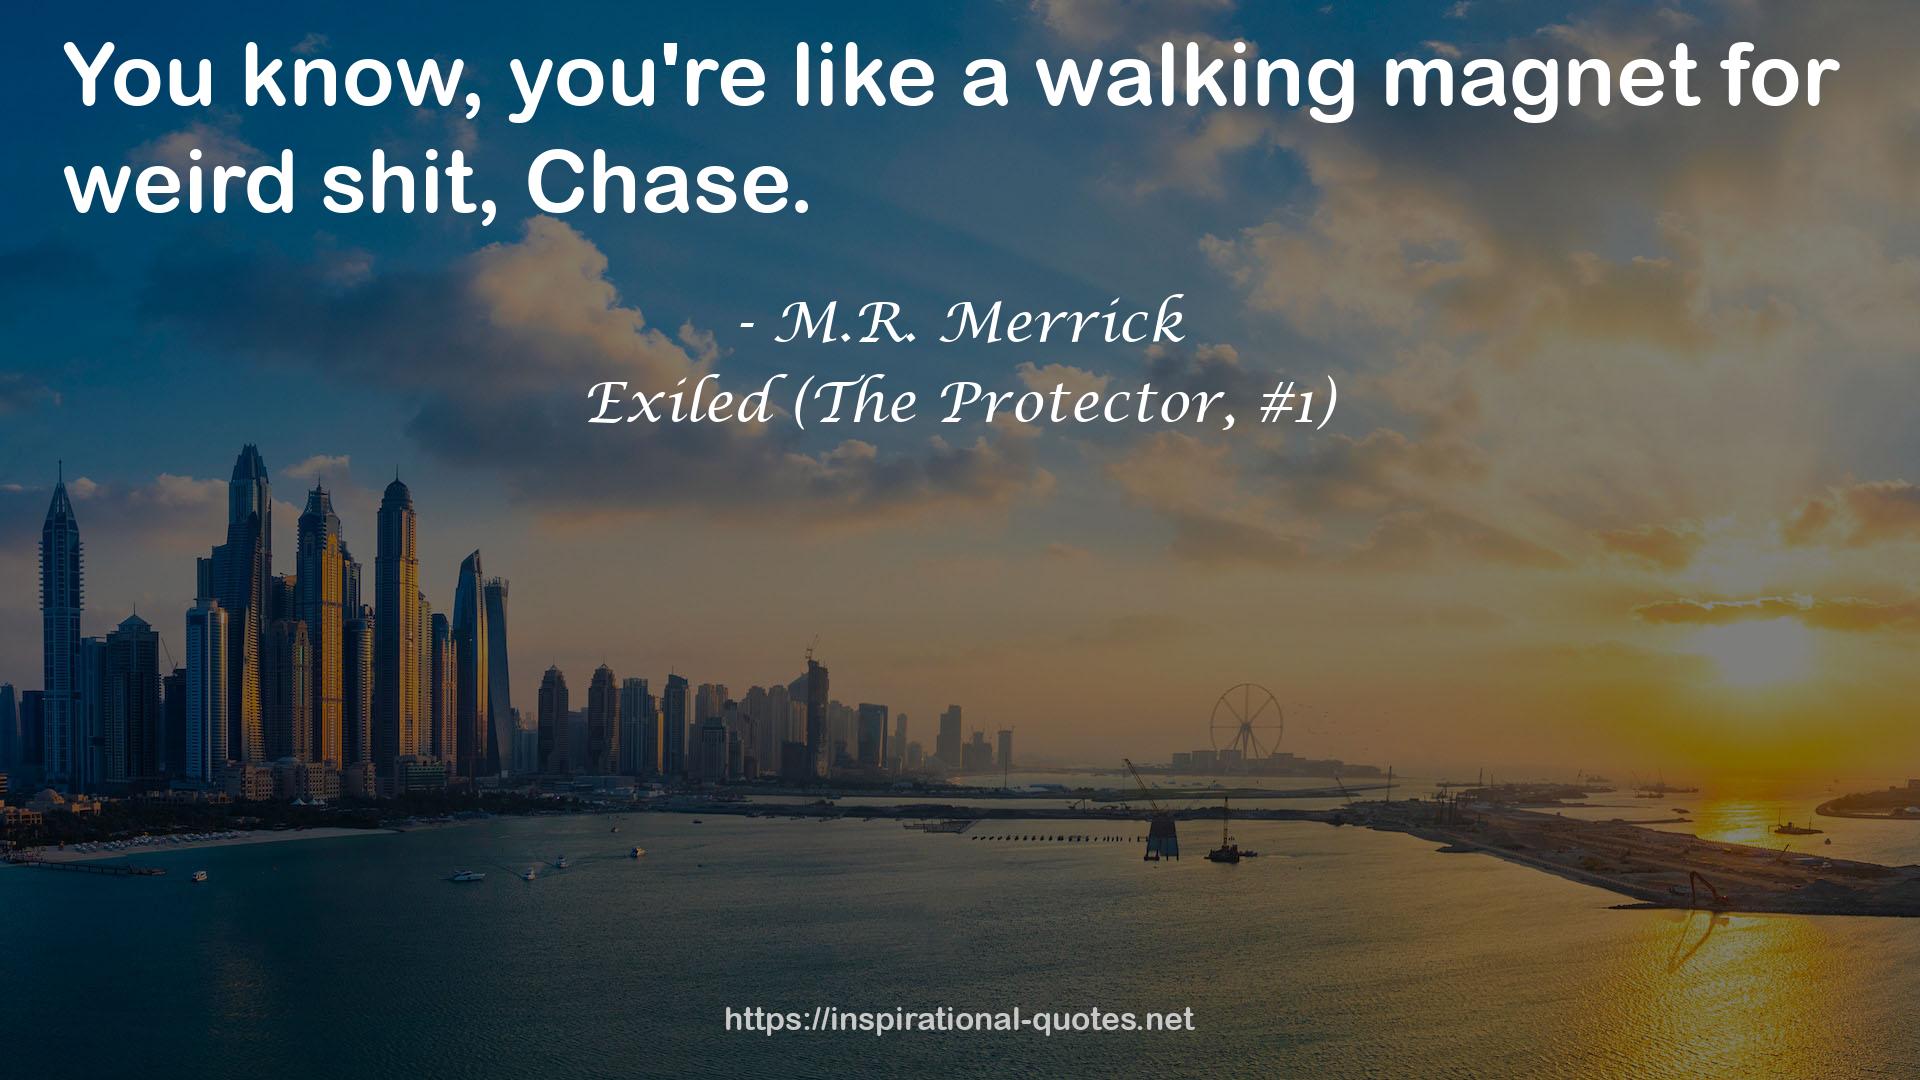 Exiled (The Protector, #1) QUOTES